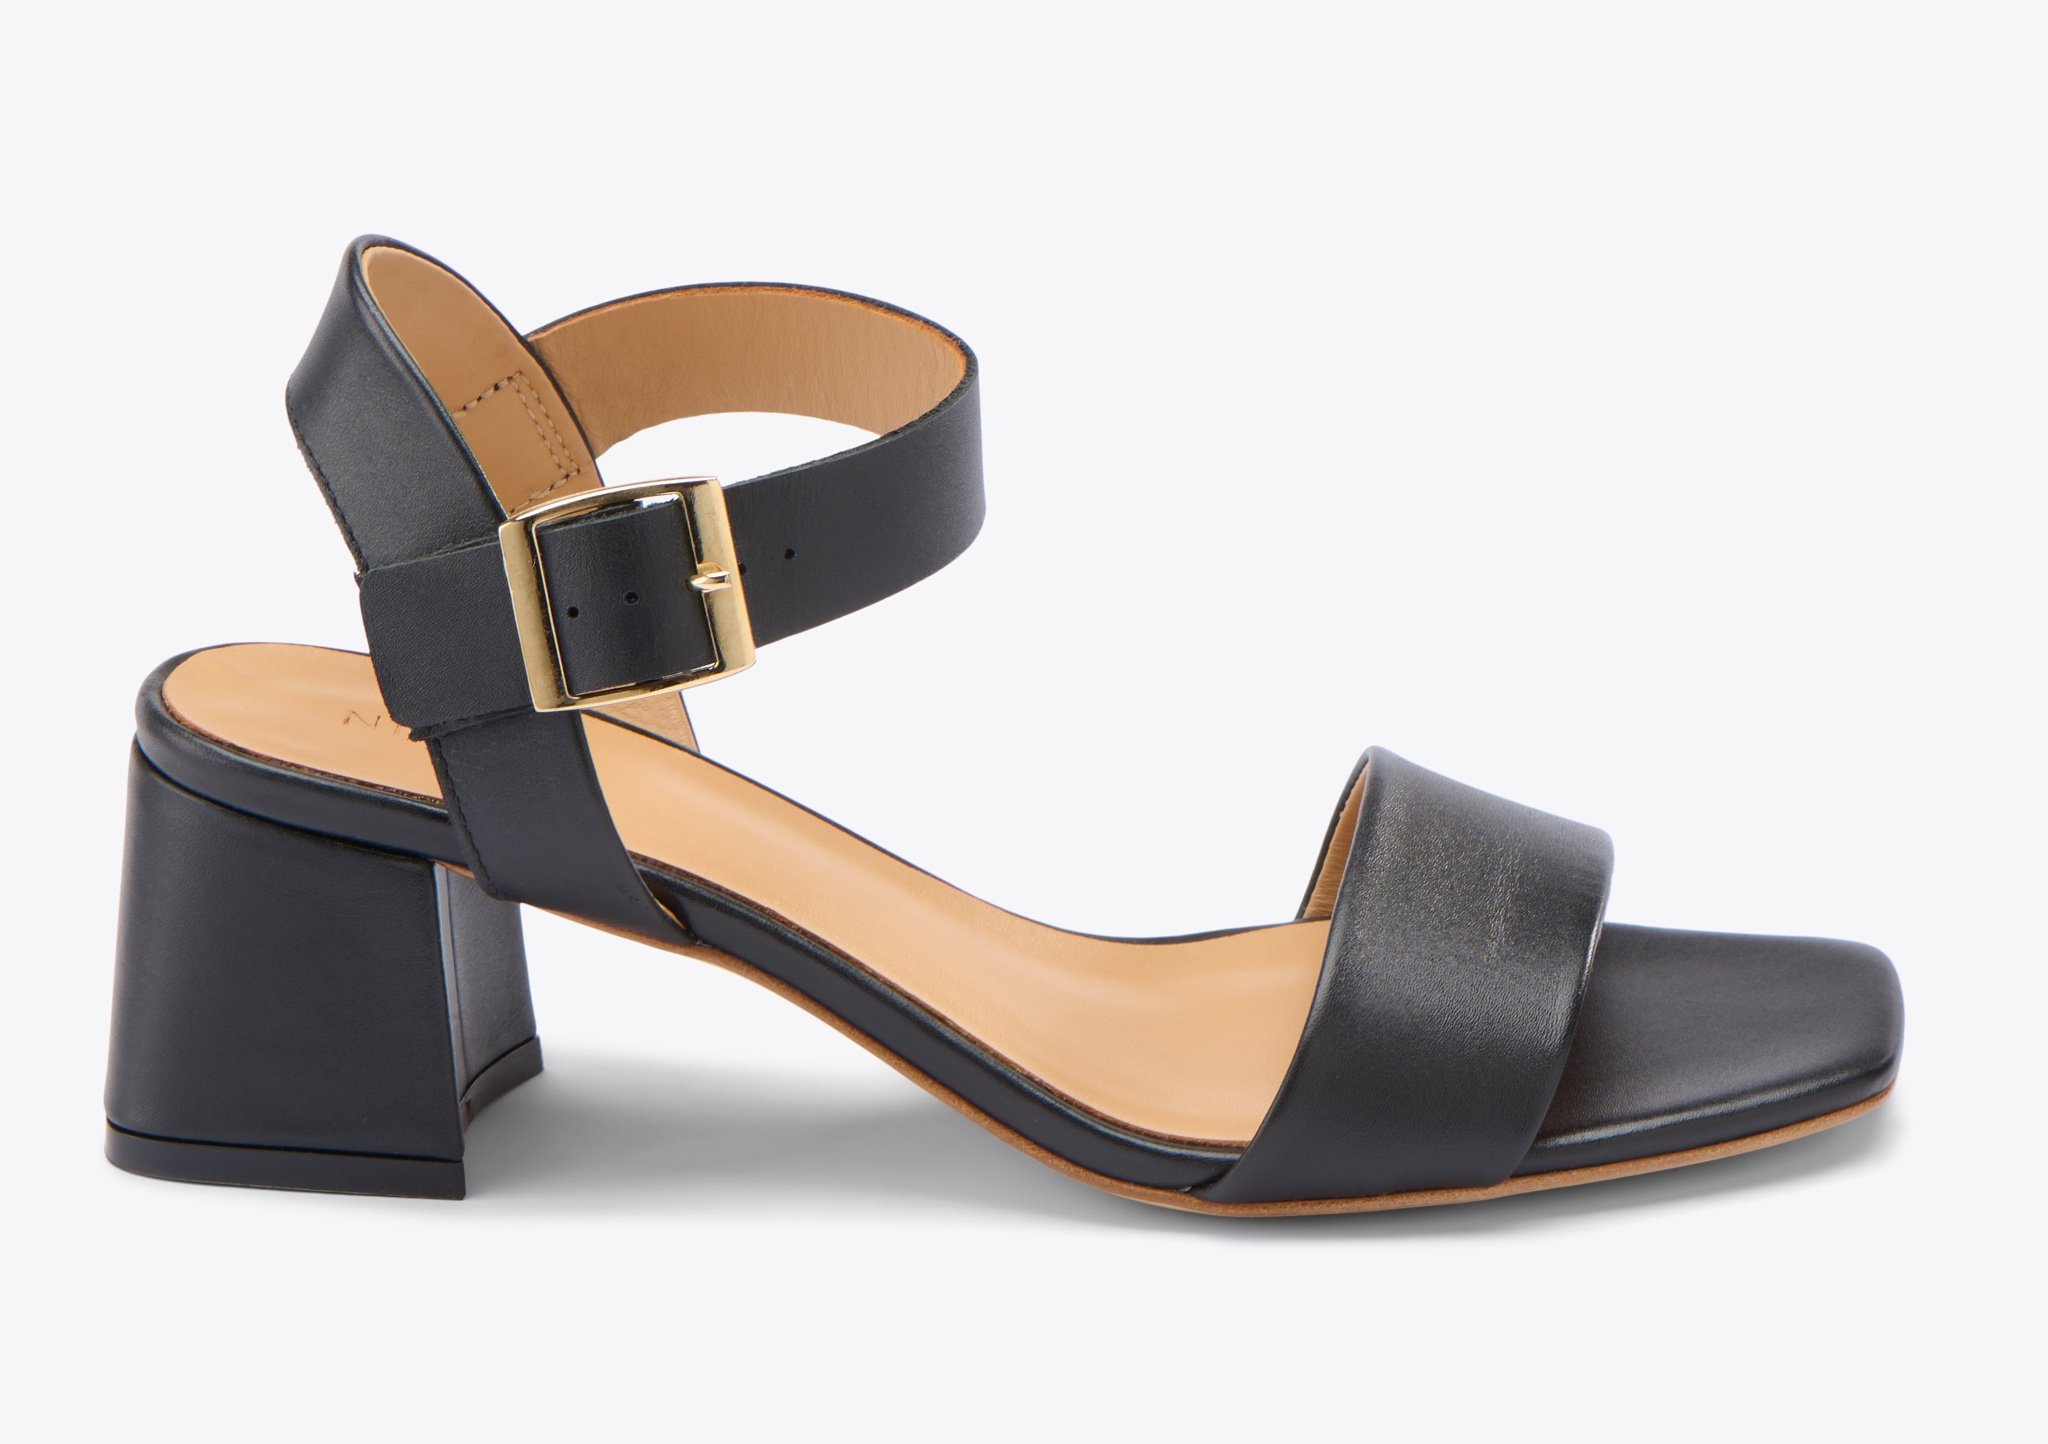 Nisolo Stella Go-To Block Heel Sandal Black - Every Nisolo product is built on the foundation of comfort, function, and design. 